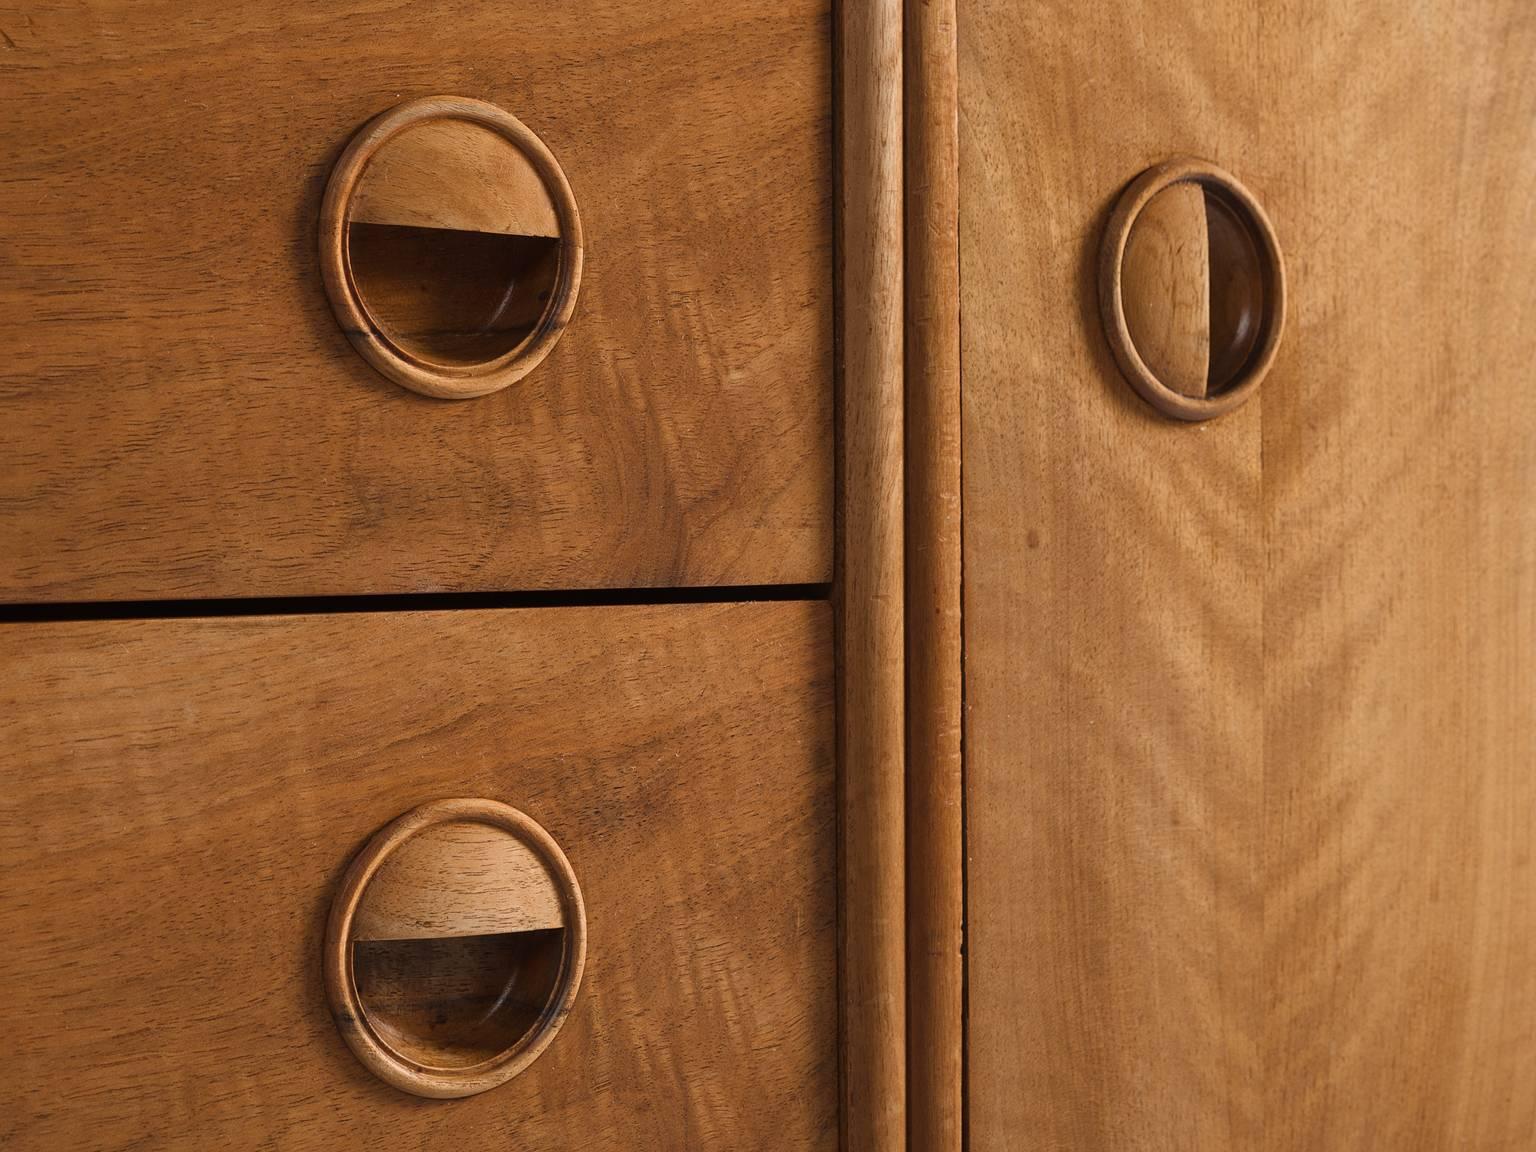 William Watting for Fristho Cabinet in Teak and Brass 2